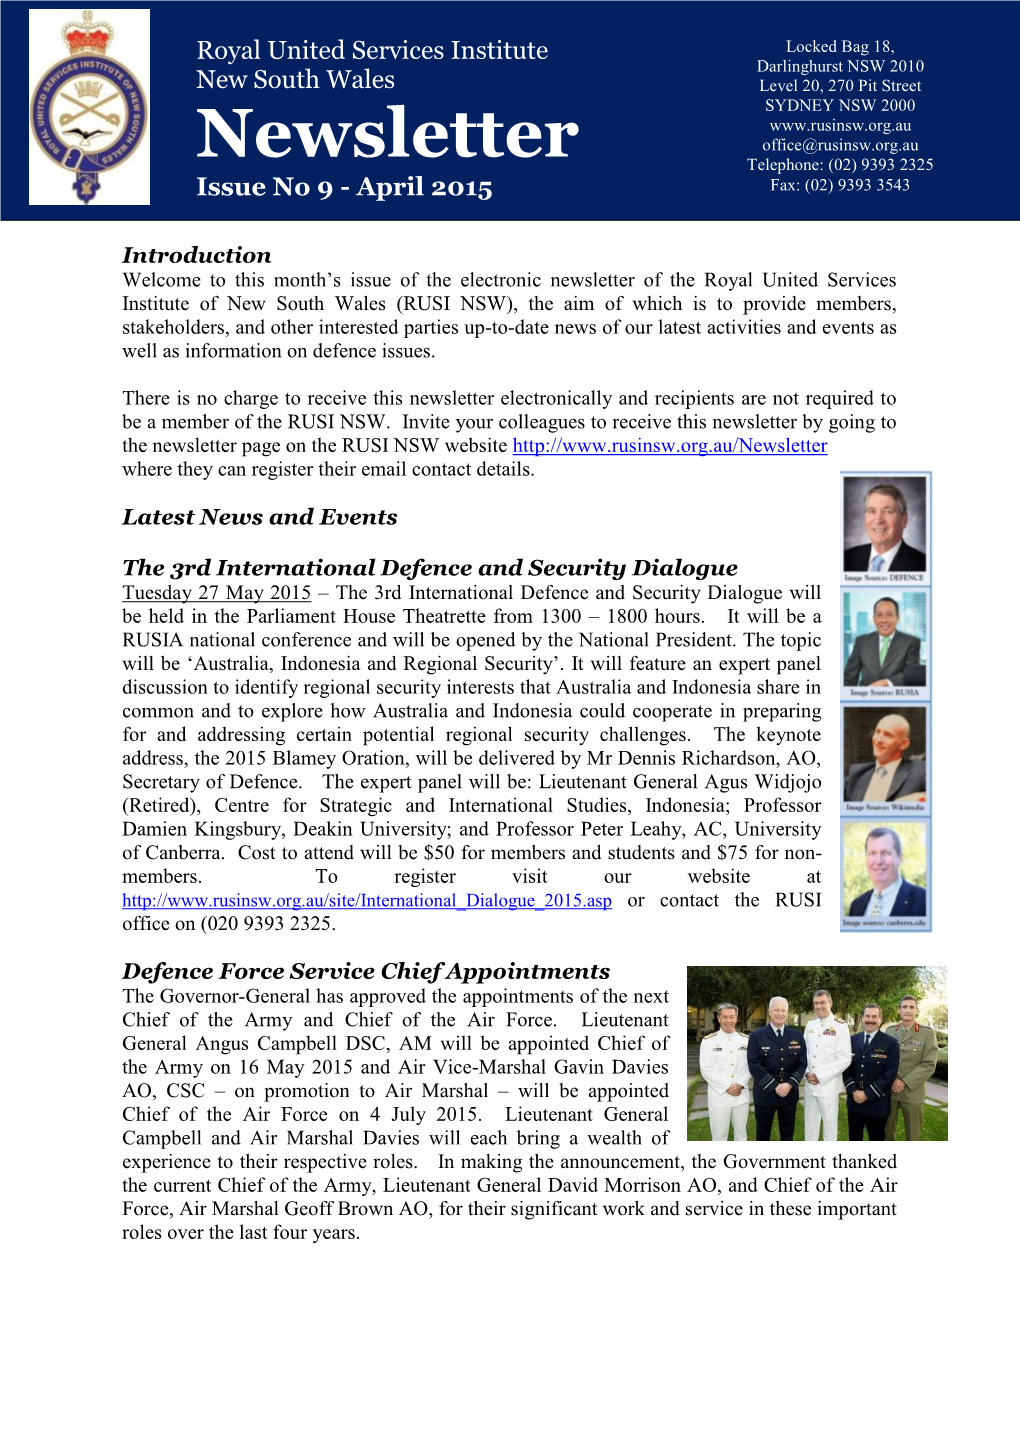 Newsletter Office@Rusinsw.Org.Au Telephone: (02) 9393 2325 Issue No 9 - April 2015 Fax: (02) 9393 3543